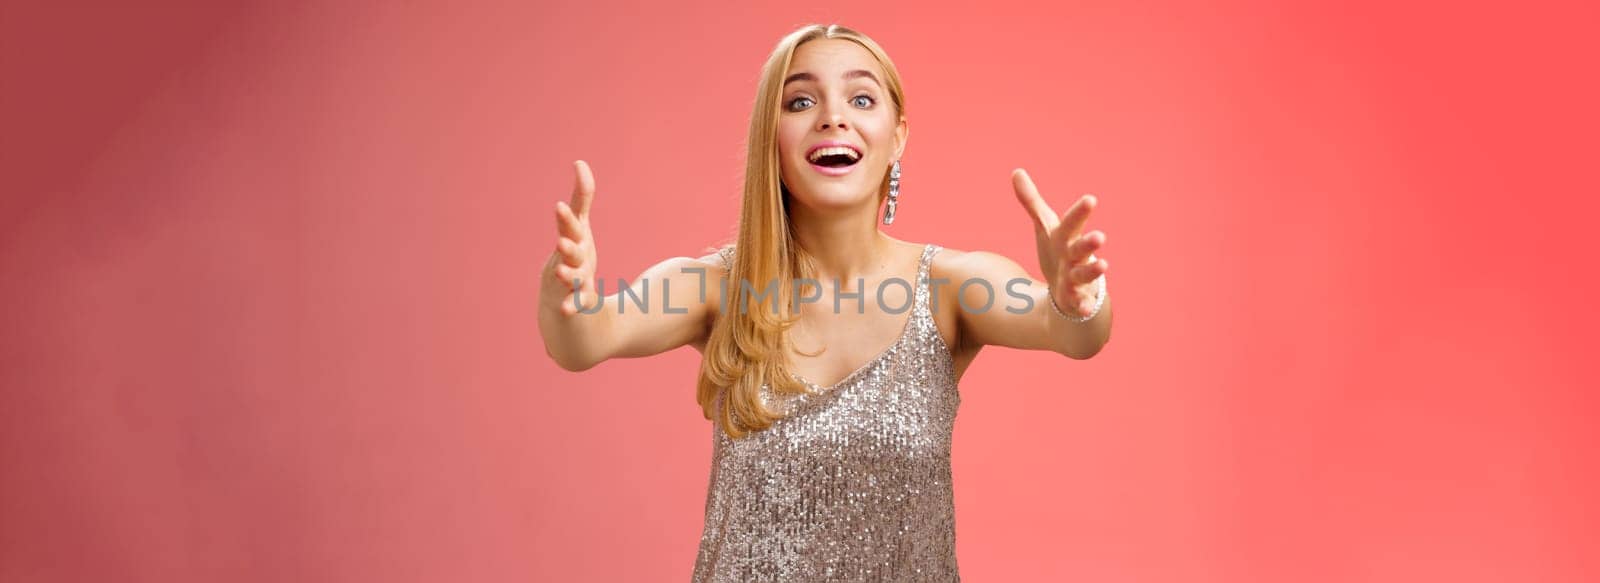 Excited charmign touched hearwarming young blond woman in silver party glamour dress stretch hands towards camera amused wanna hug cuddle hold cute puppy arms, standing red background.